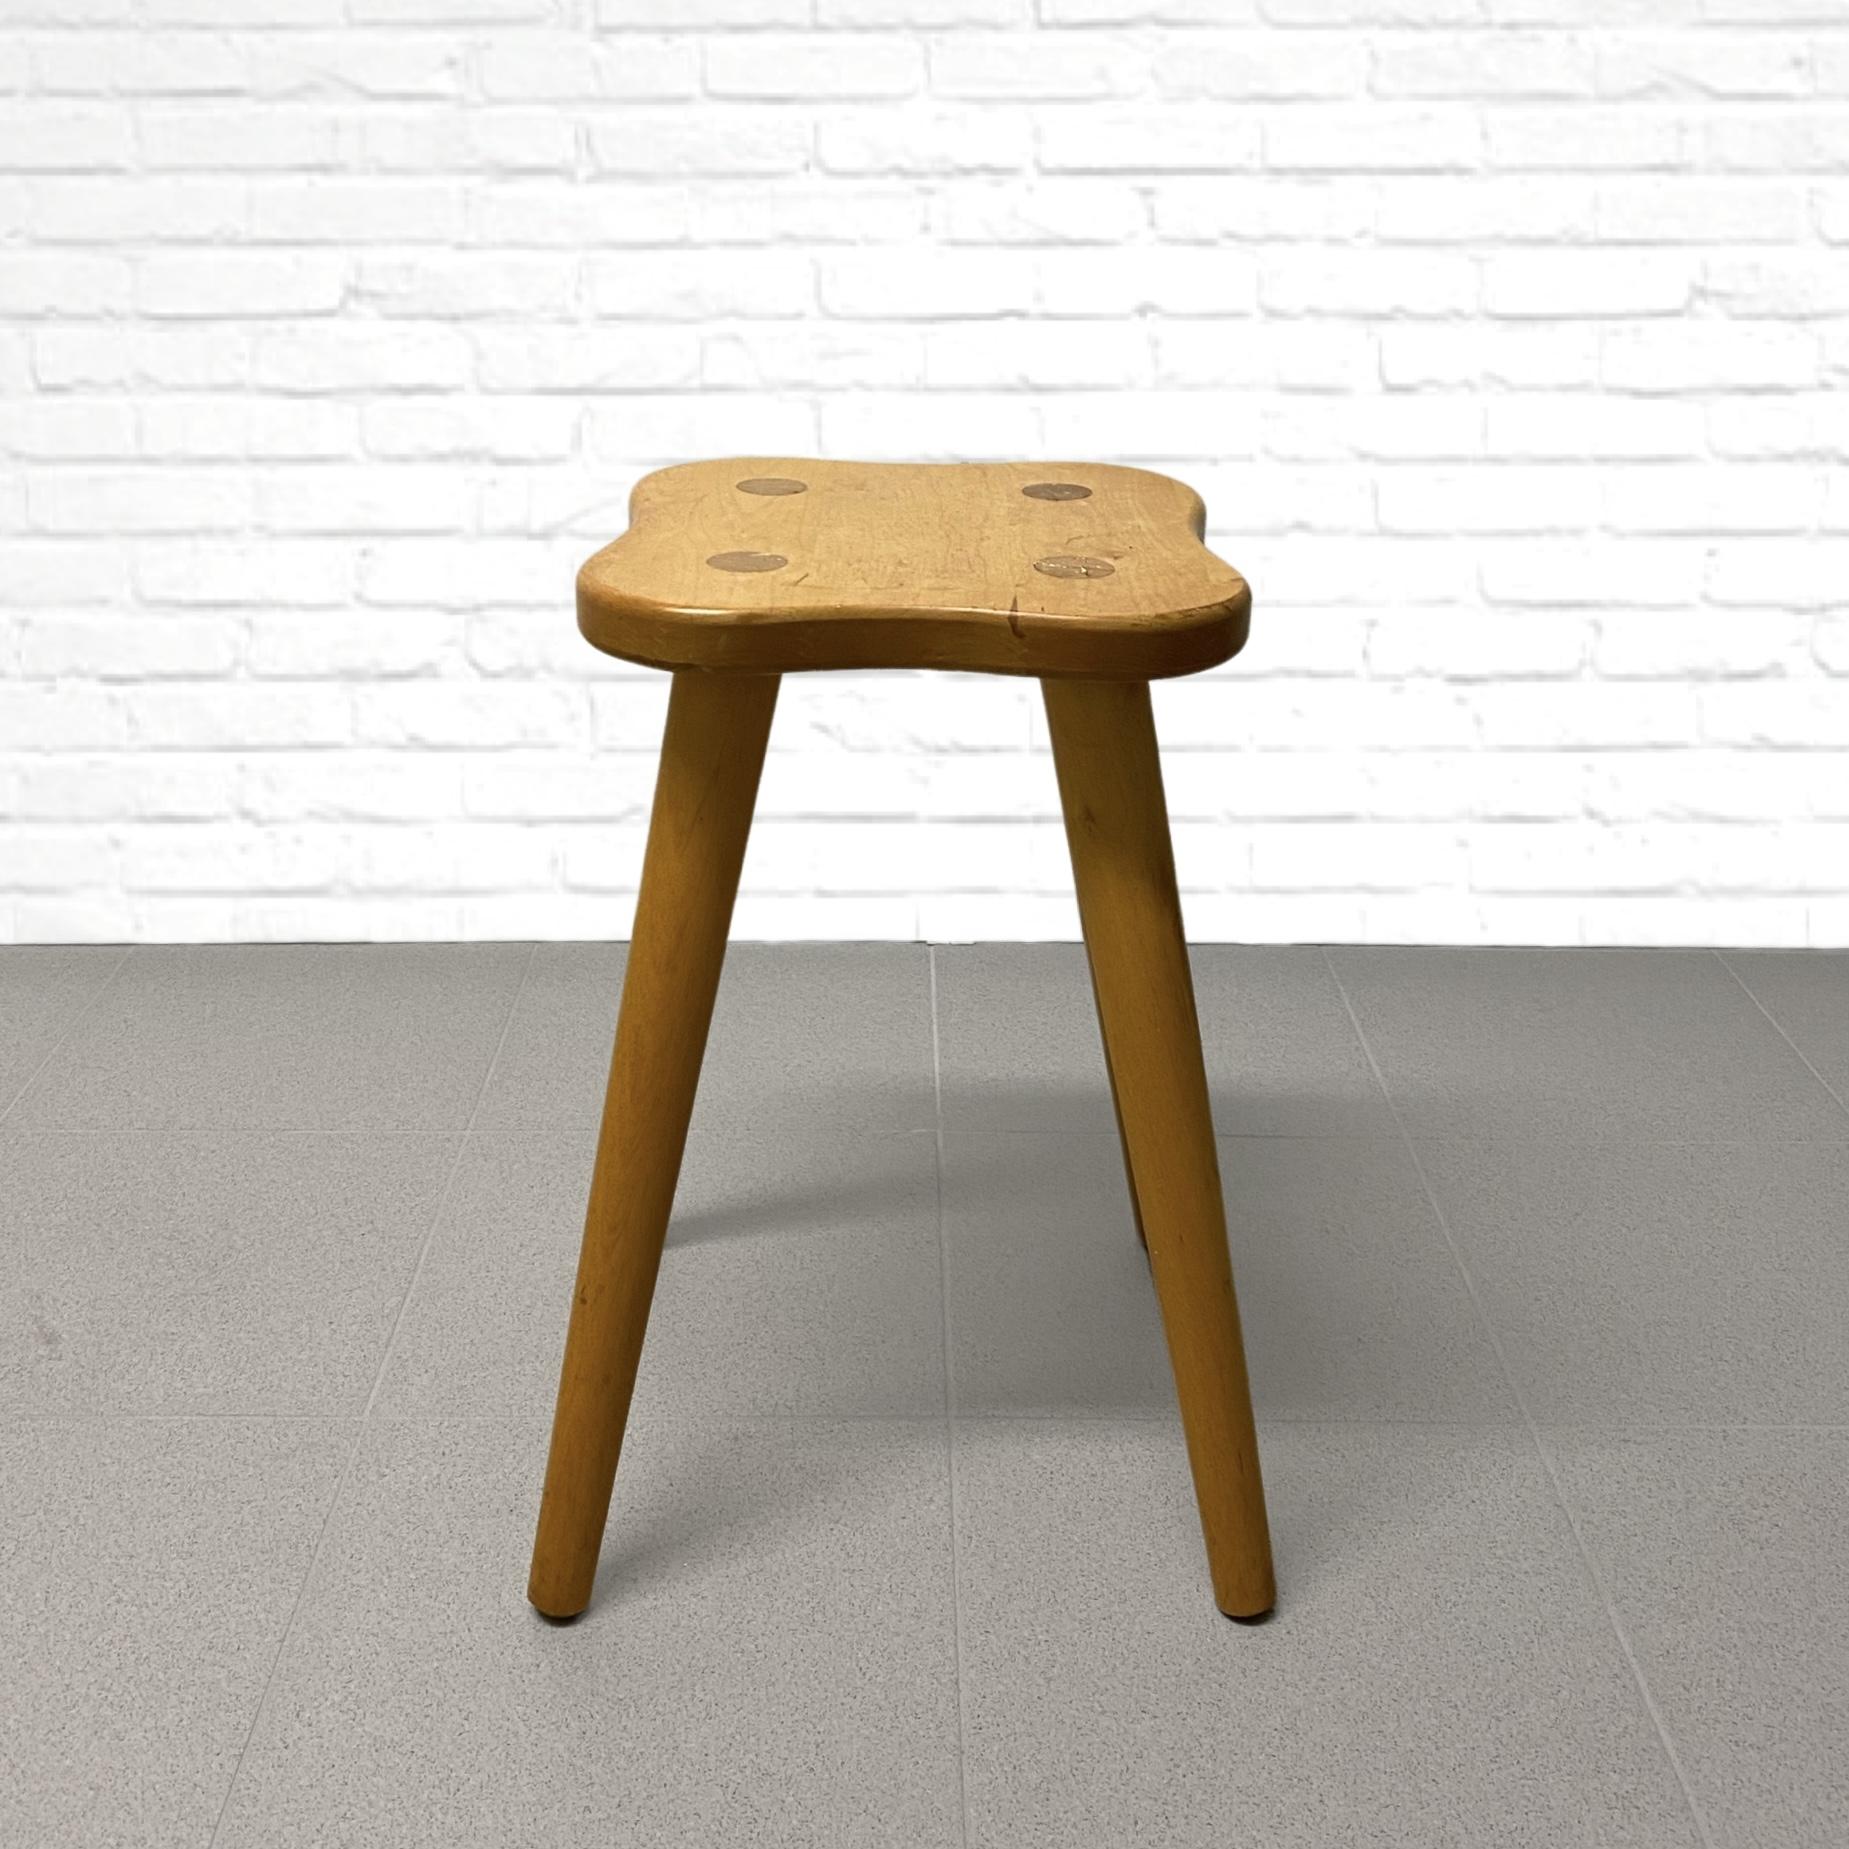 Swedish mid-century stool with an organic shape, skillfully crafted from solid birch at the workshops of the Nannylund vocational school for students with intellectual disabilities. This piece is a testament to the remarkable furniture produced in